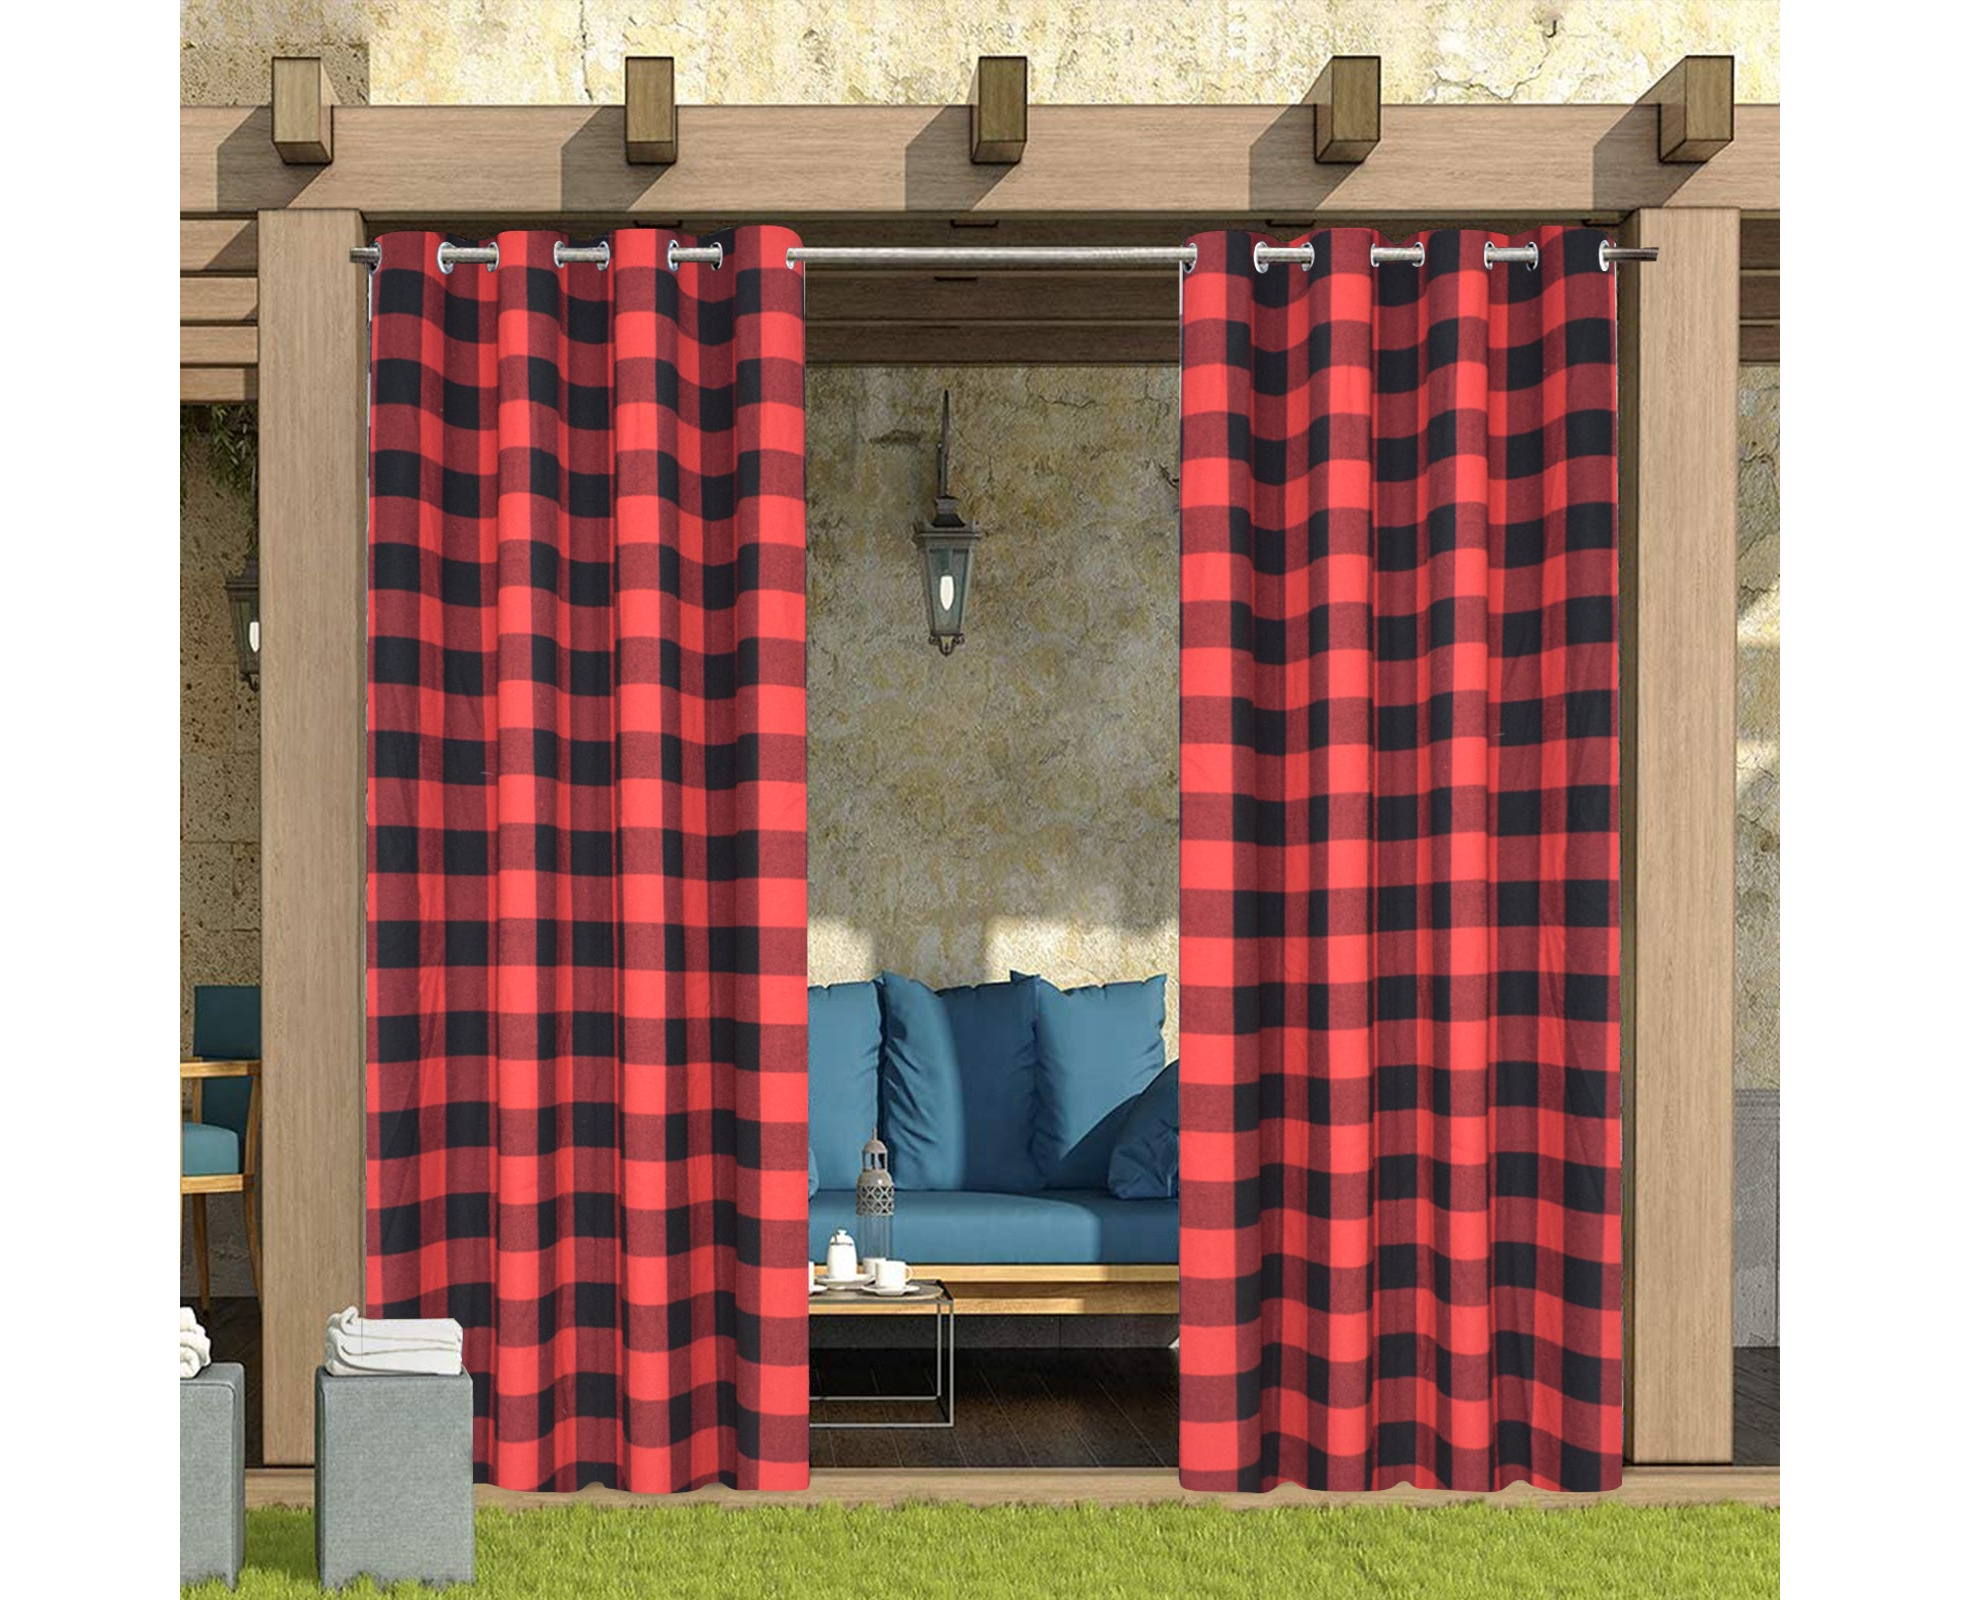 LIFONDER Outdoor Sheer Curtains 84 W54 x L84 Inches Waterproof Grommet Indoor Outdoor Curtains Patio Privacy Off White Sheer Drapes Blinds for Porch/Deck/Pergola with 2 Tiebacks 2 Panels 